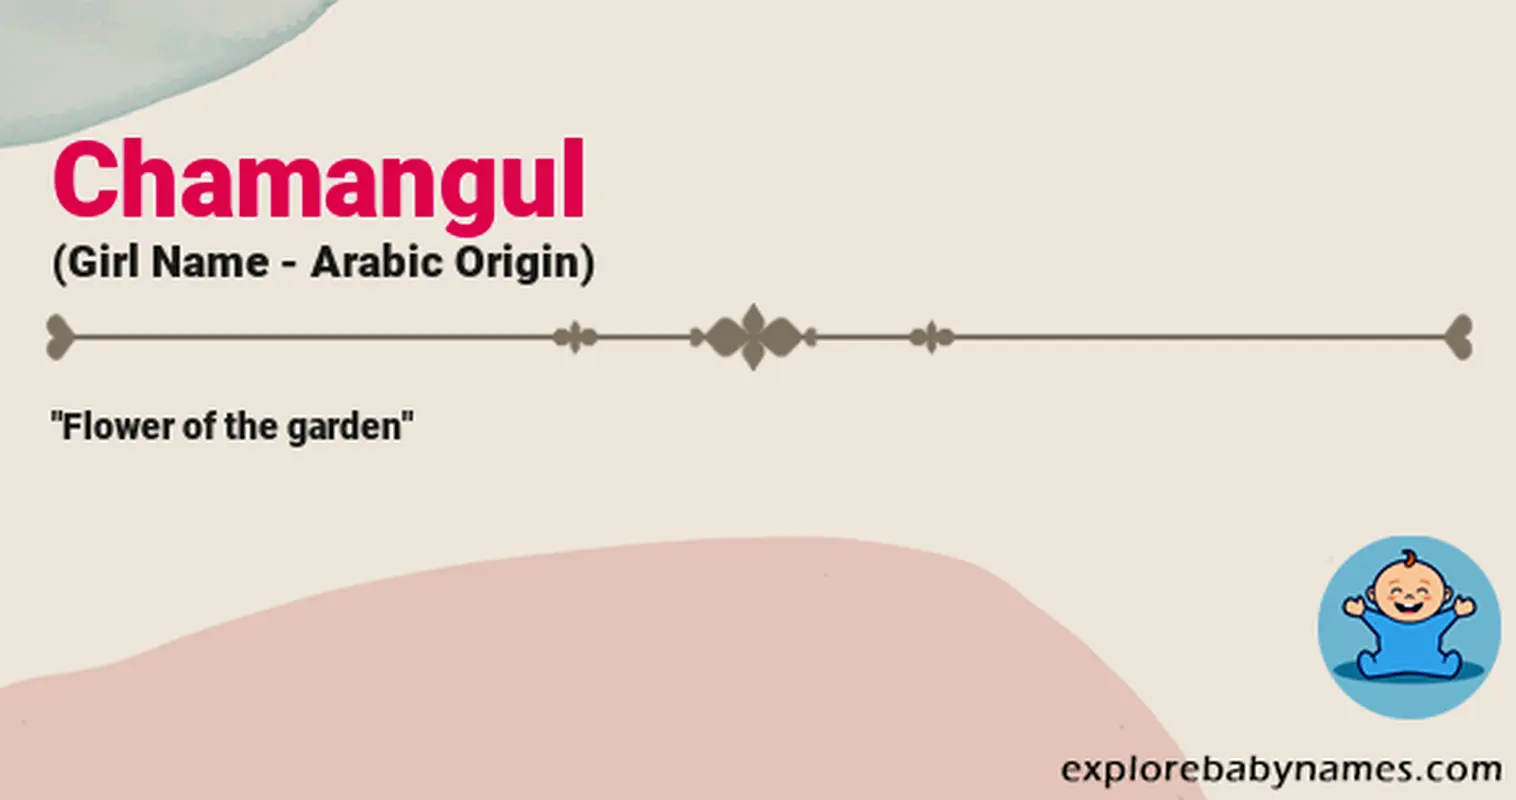 Meaning of Chamangul